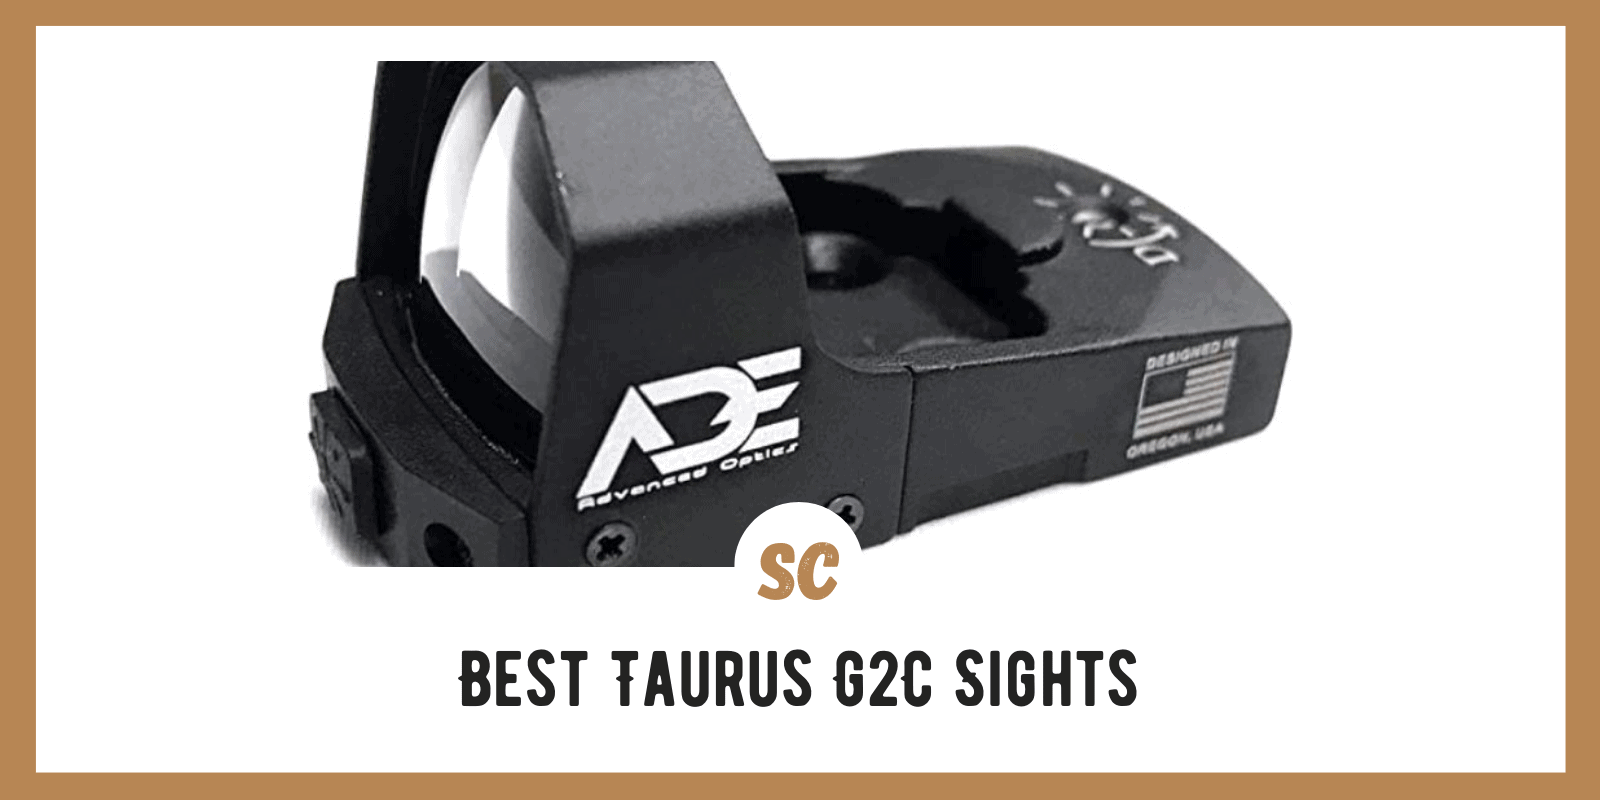 Ins and Outs of the Best Taurus G2C Sights: 6 Picks with Pros and Cons